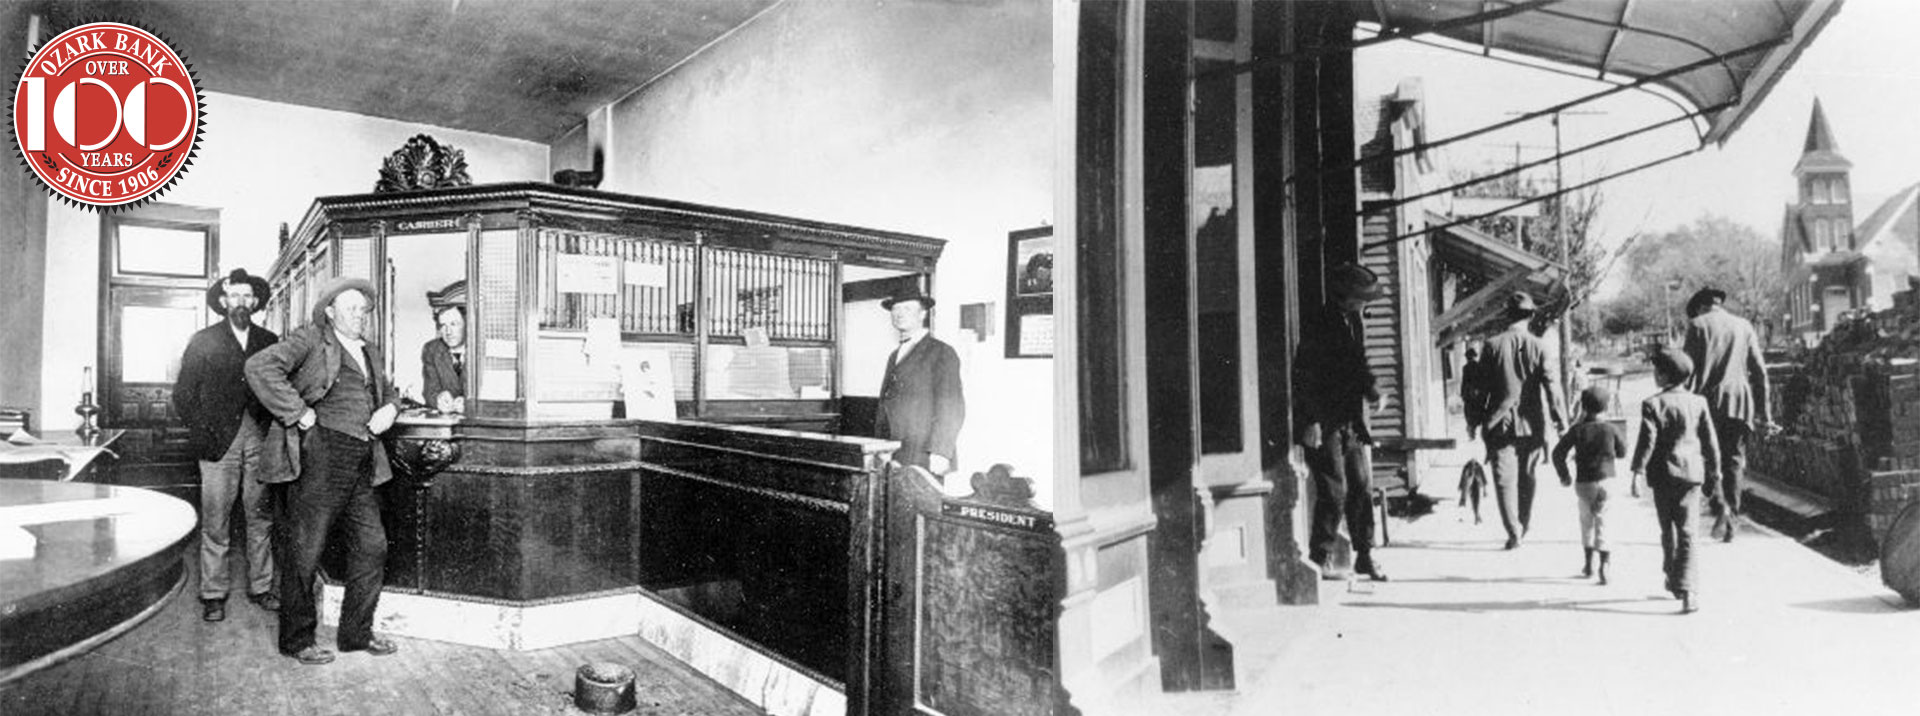 Ozark Bank historical image with bank interior and street